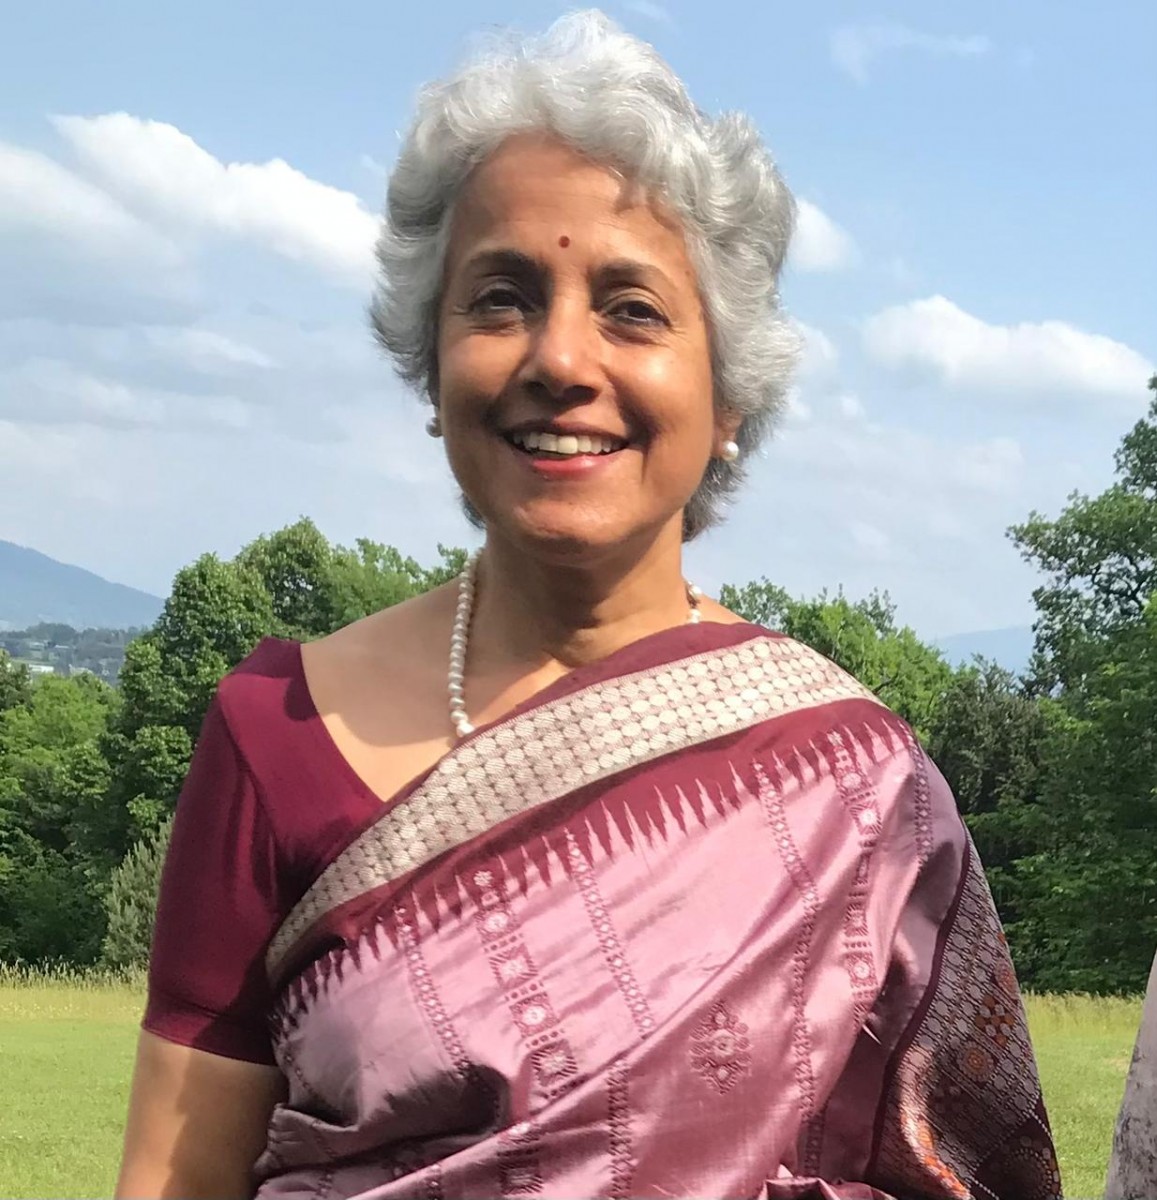 A headshot of Dr. Soumya Swaminathan, a medium-skinned woman with short, curly grey hair and wearing a pink sari smiling at the camera. She's standing outdoors in a field on a sunny day with trees in the distance.